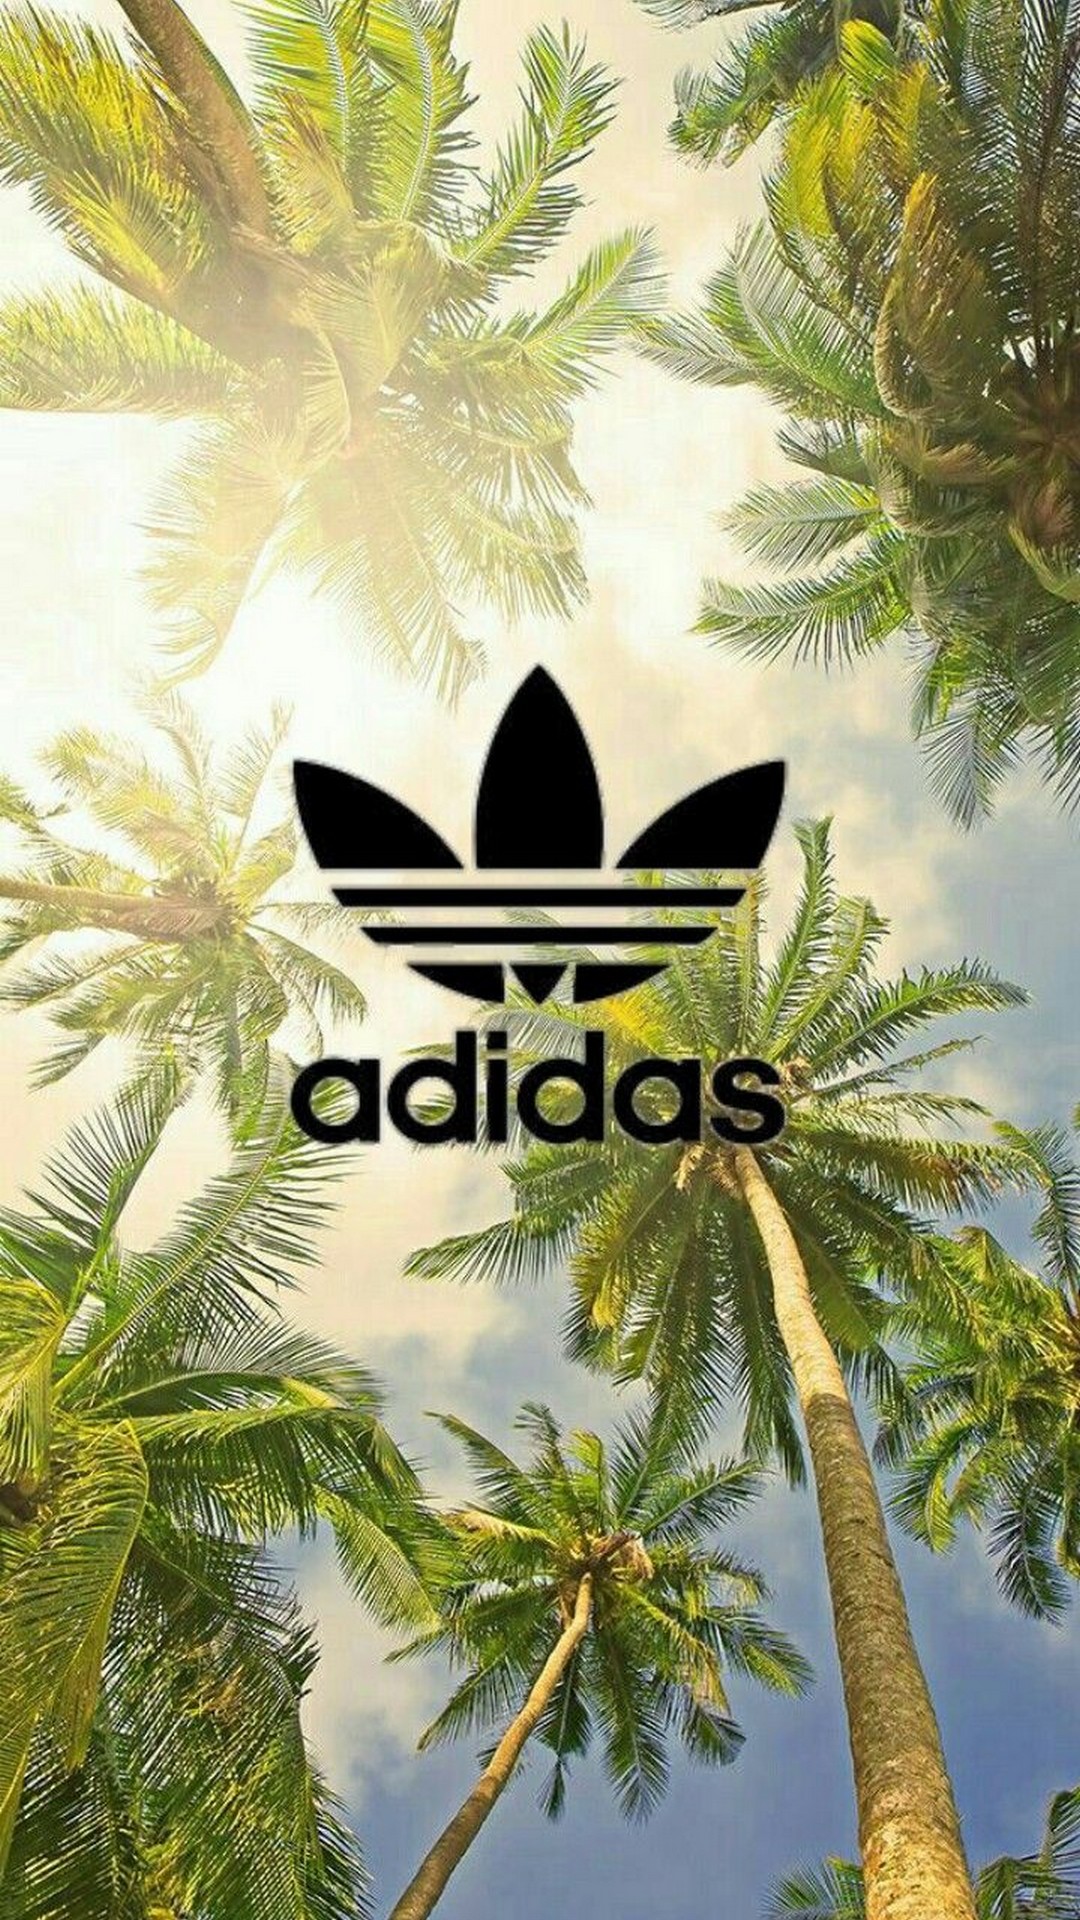 Adidas Logo iPhone Wallpaper Home Screen With high-resolution 1080X1920 pixel. You can set as wallpaper for Apple iPhone X, XS Max, XR, 8, 7, 6, SE, iPad. Enjoy and share your favorite HD wallpapers and background images